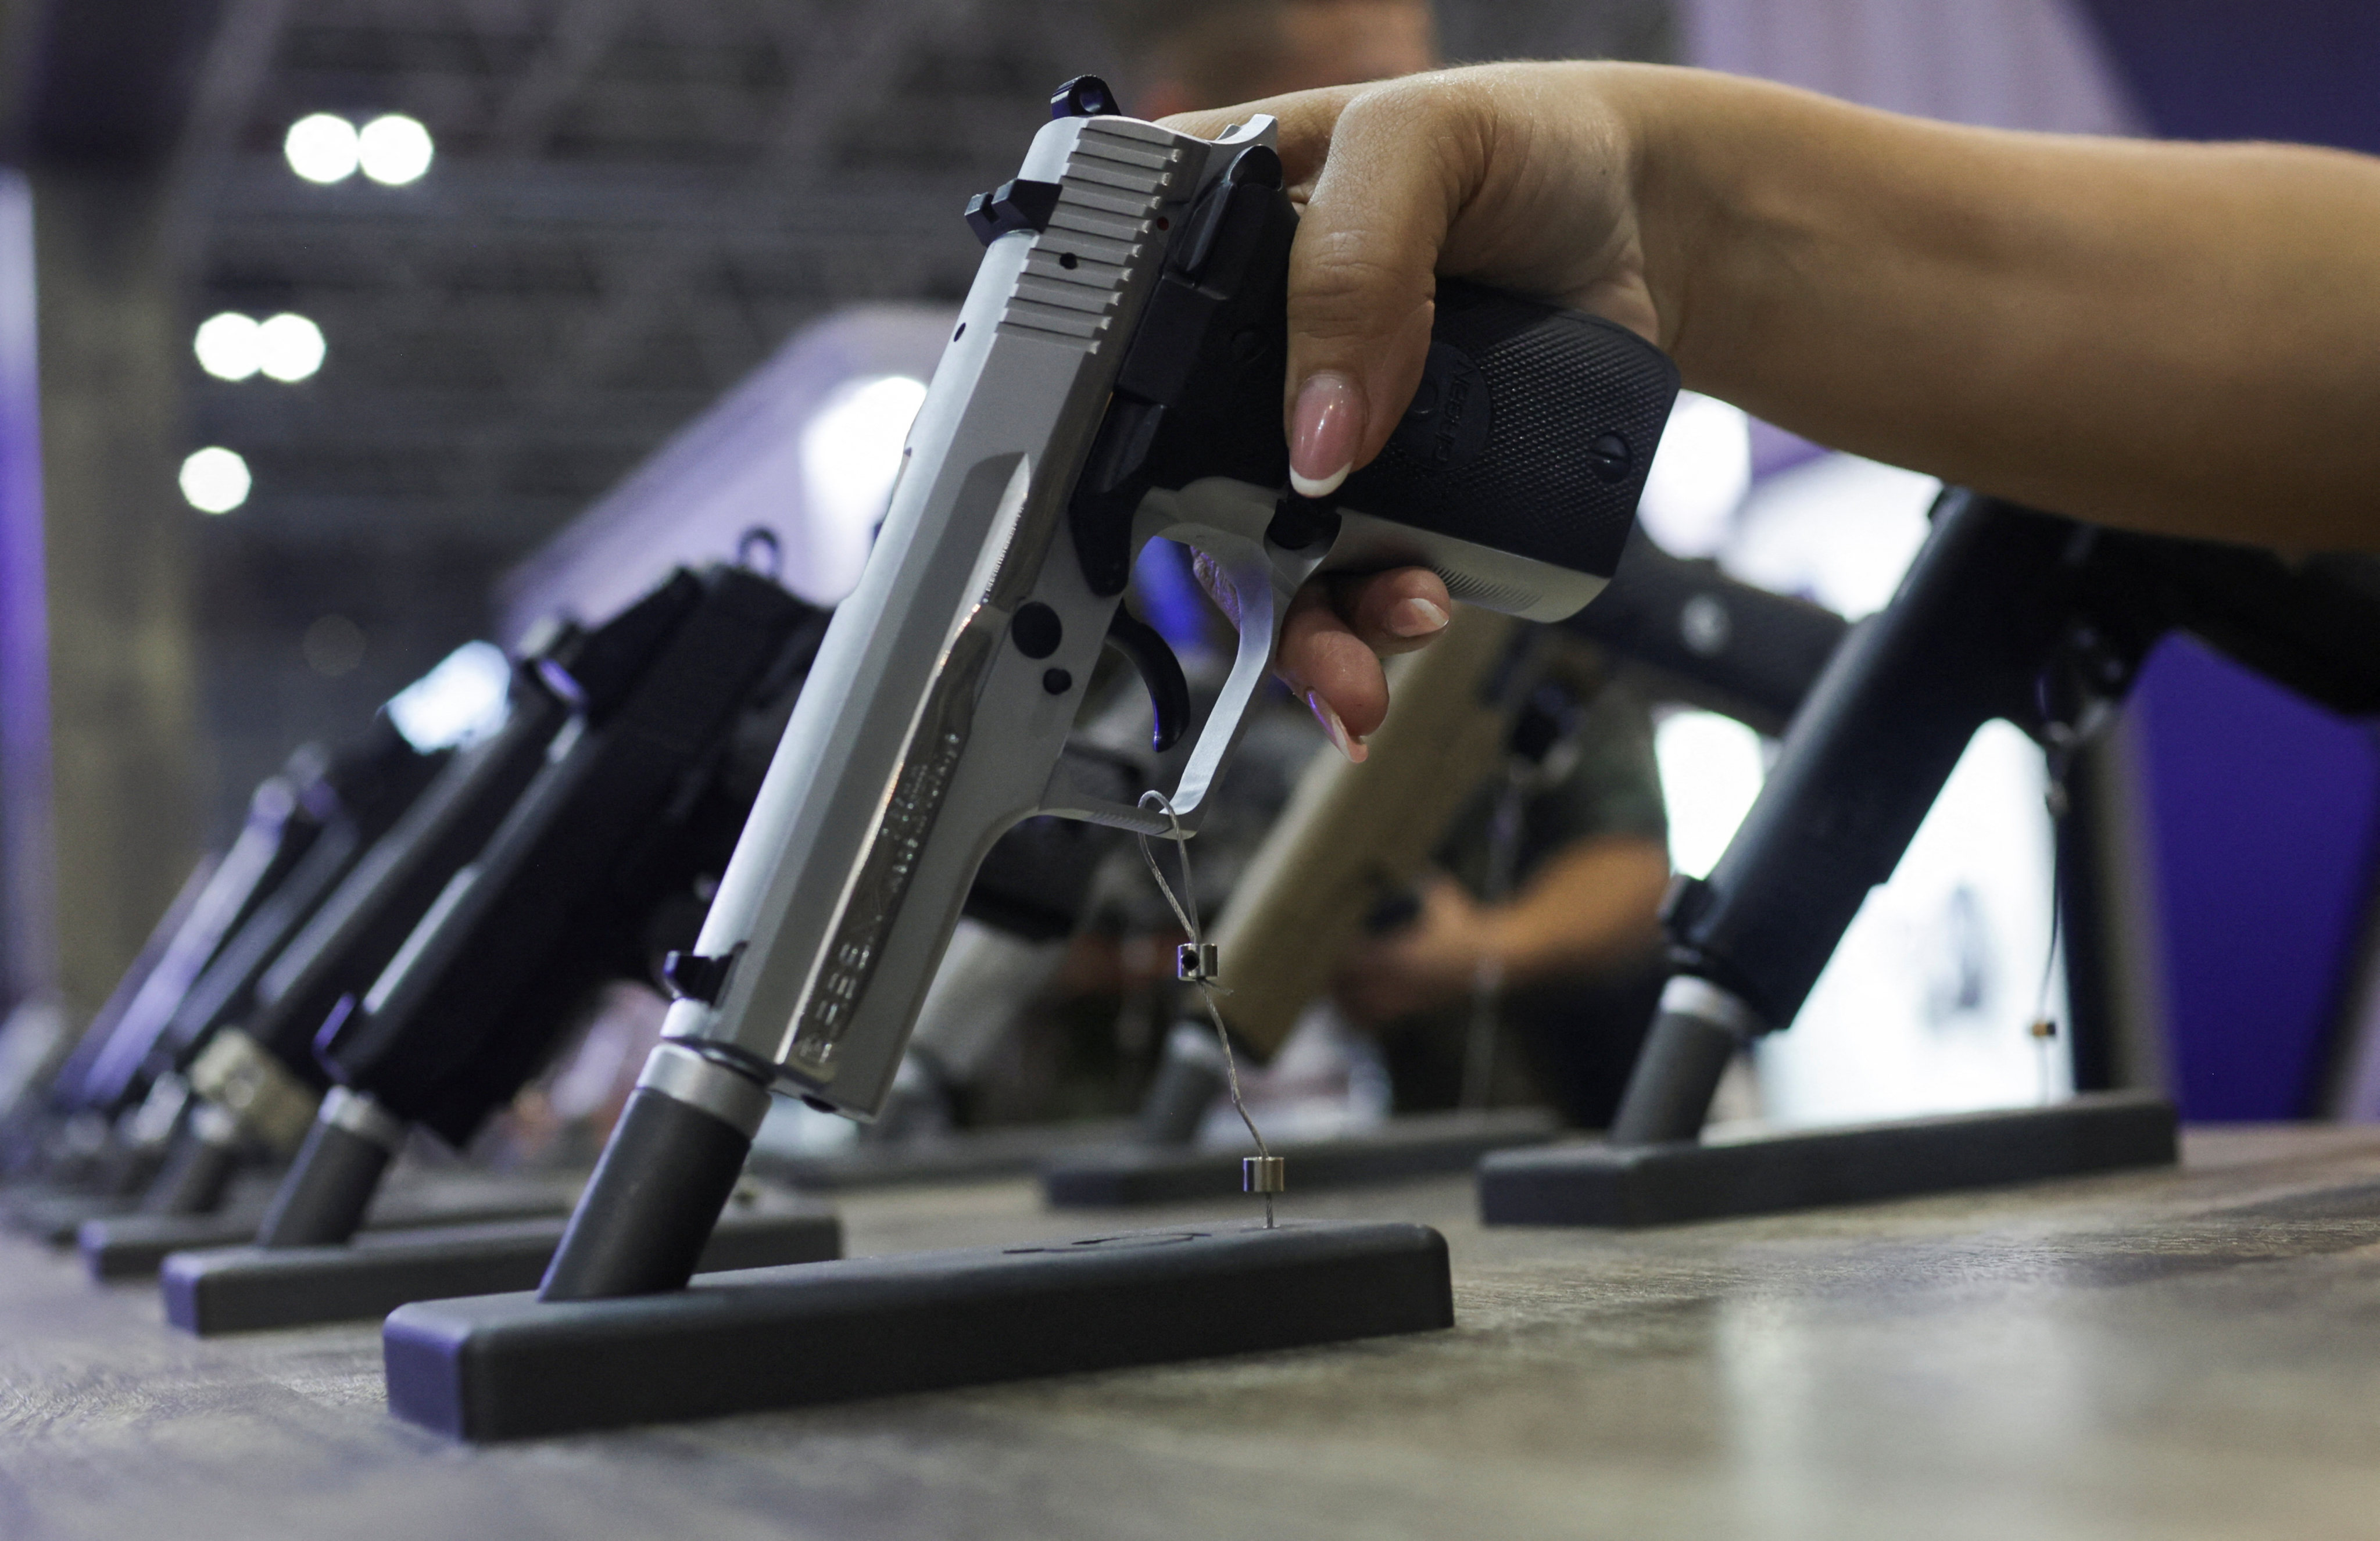 A woman holds a gun during a military industry event in Brazil on April 11. Attacks in schools there are rising. Photo: Photo: Reuters